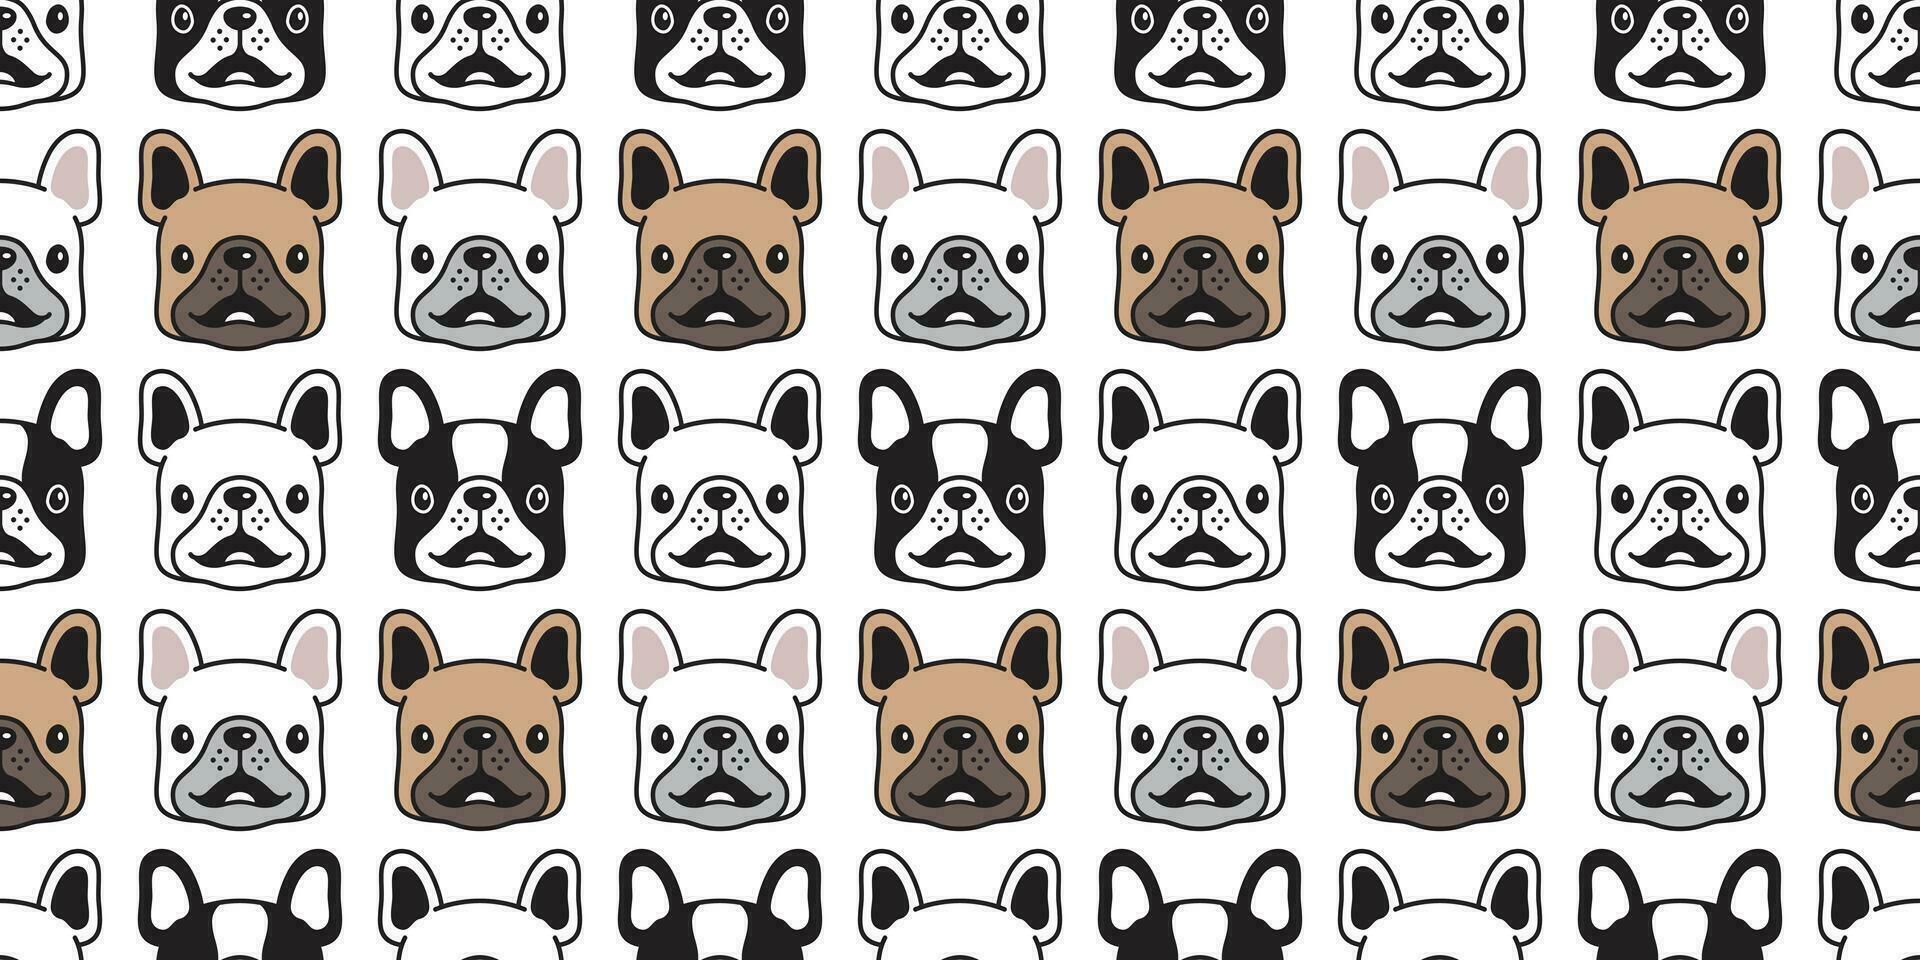 dog seamless pattern vector french bulldog smile face cartoon scarf isolated repeat background tile wallpaper illustration design